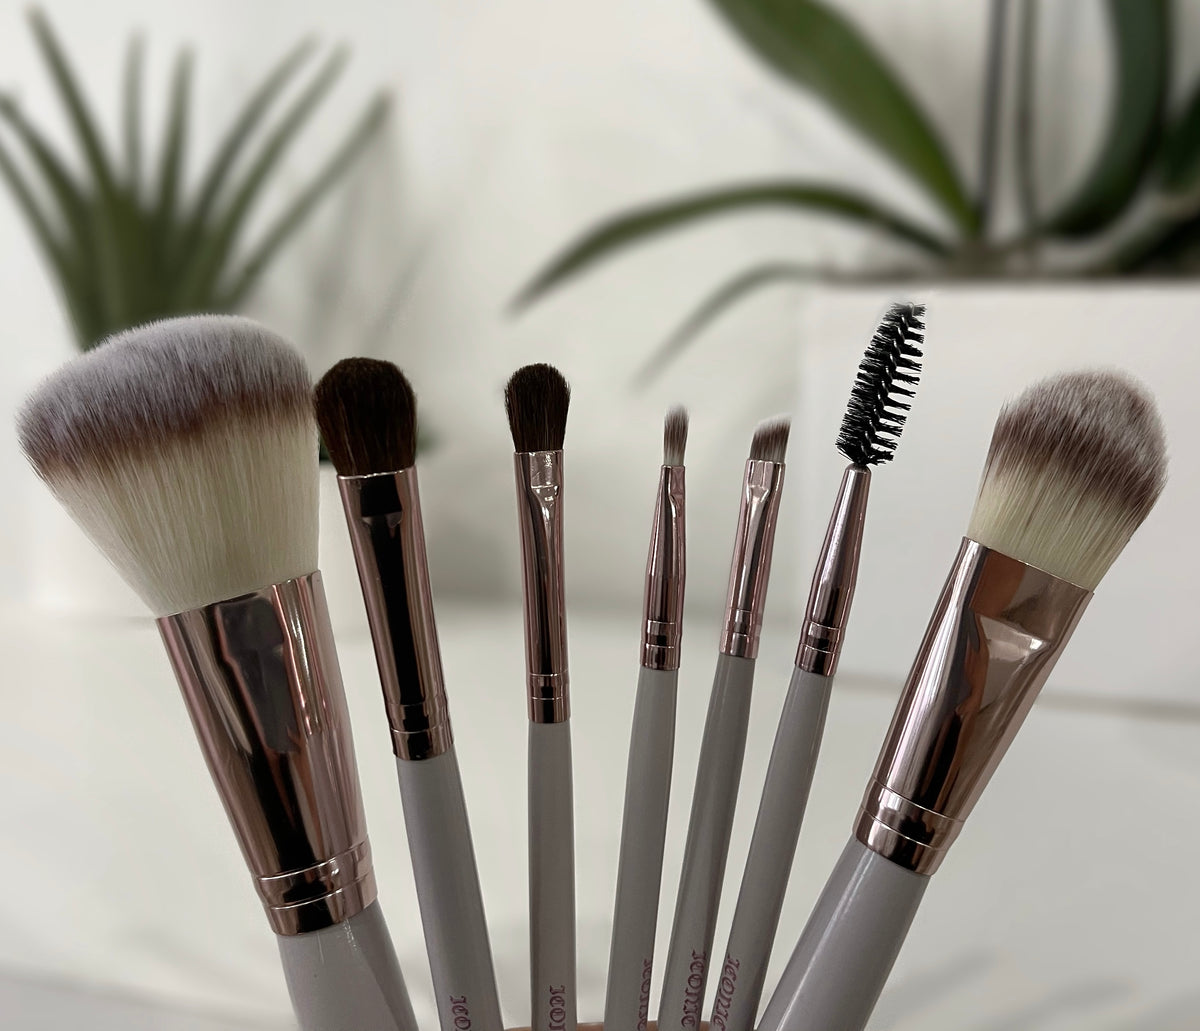 Eyes, lashes, lips & face! This 7 piece makeup brush set can travel anywhere effortlessly, for easy on the go touch ups!